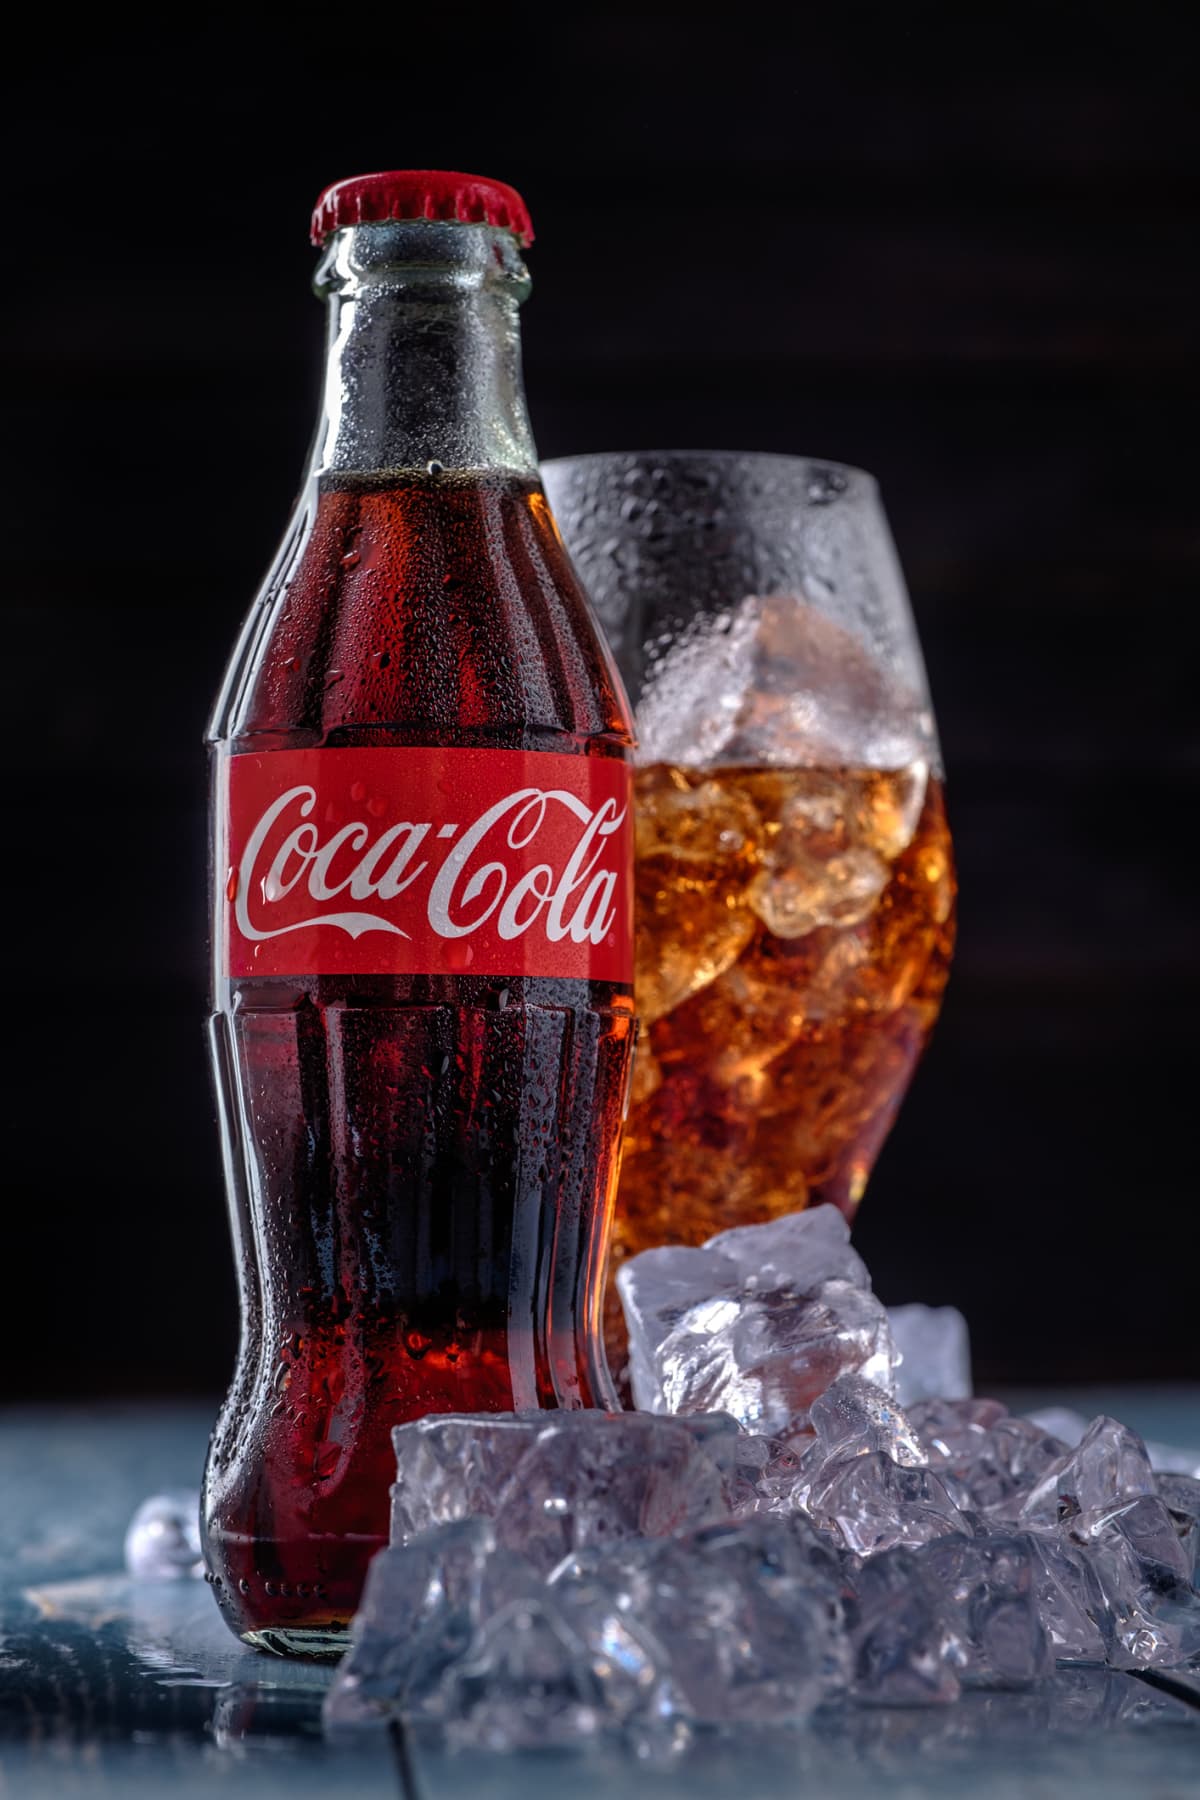 UNITED STATES - JUNE 01:  In 1896, the American chemist John Pemberton developed Coca-Cola, the ingredients of which included cocaine and kola nut extract, which contains caffeine. Within a few years, Coca-Cola and similar drinks had caused widespread cocaine addiction in America and so, in 1906, the cocaine in the Coca-Cola recipe was replaced with extra caffeine.  (Photo by SSPL/Getty Images)